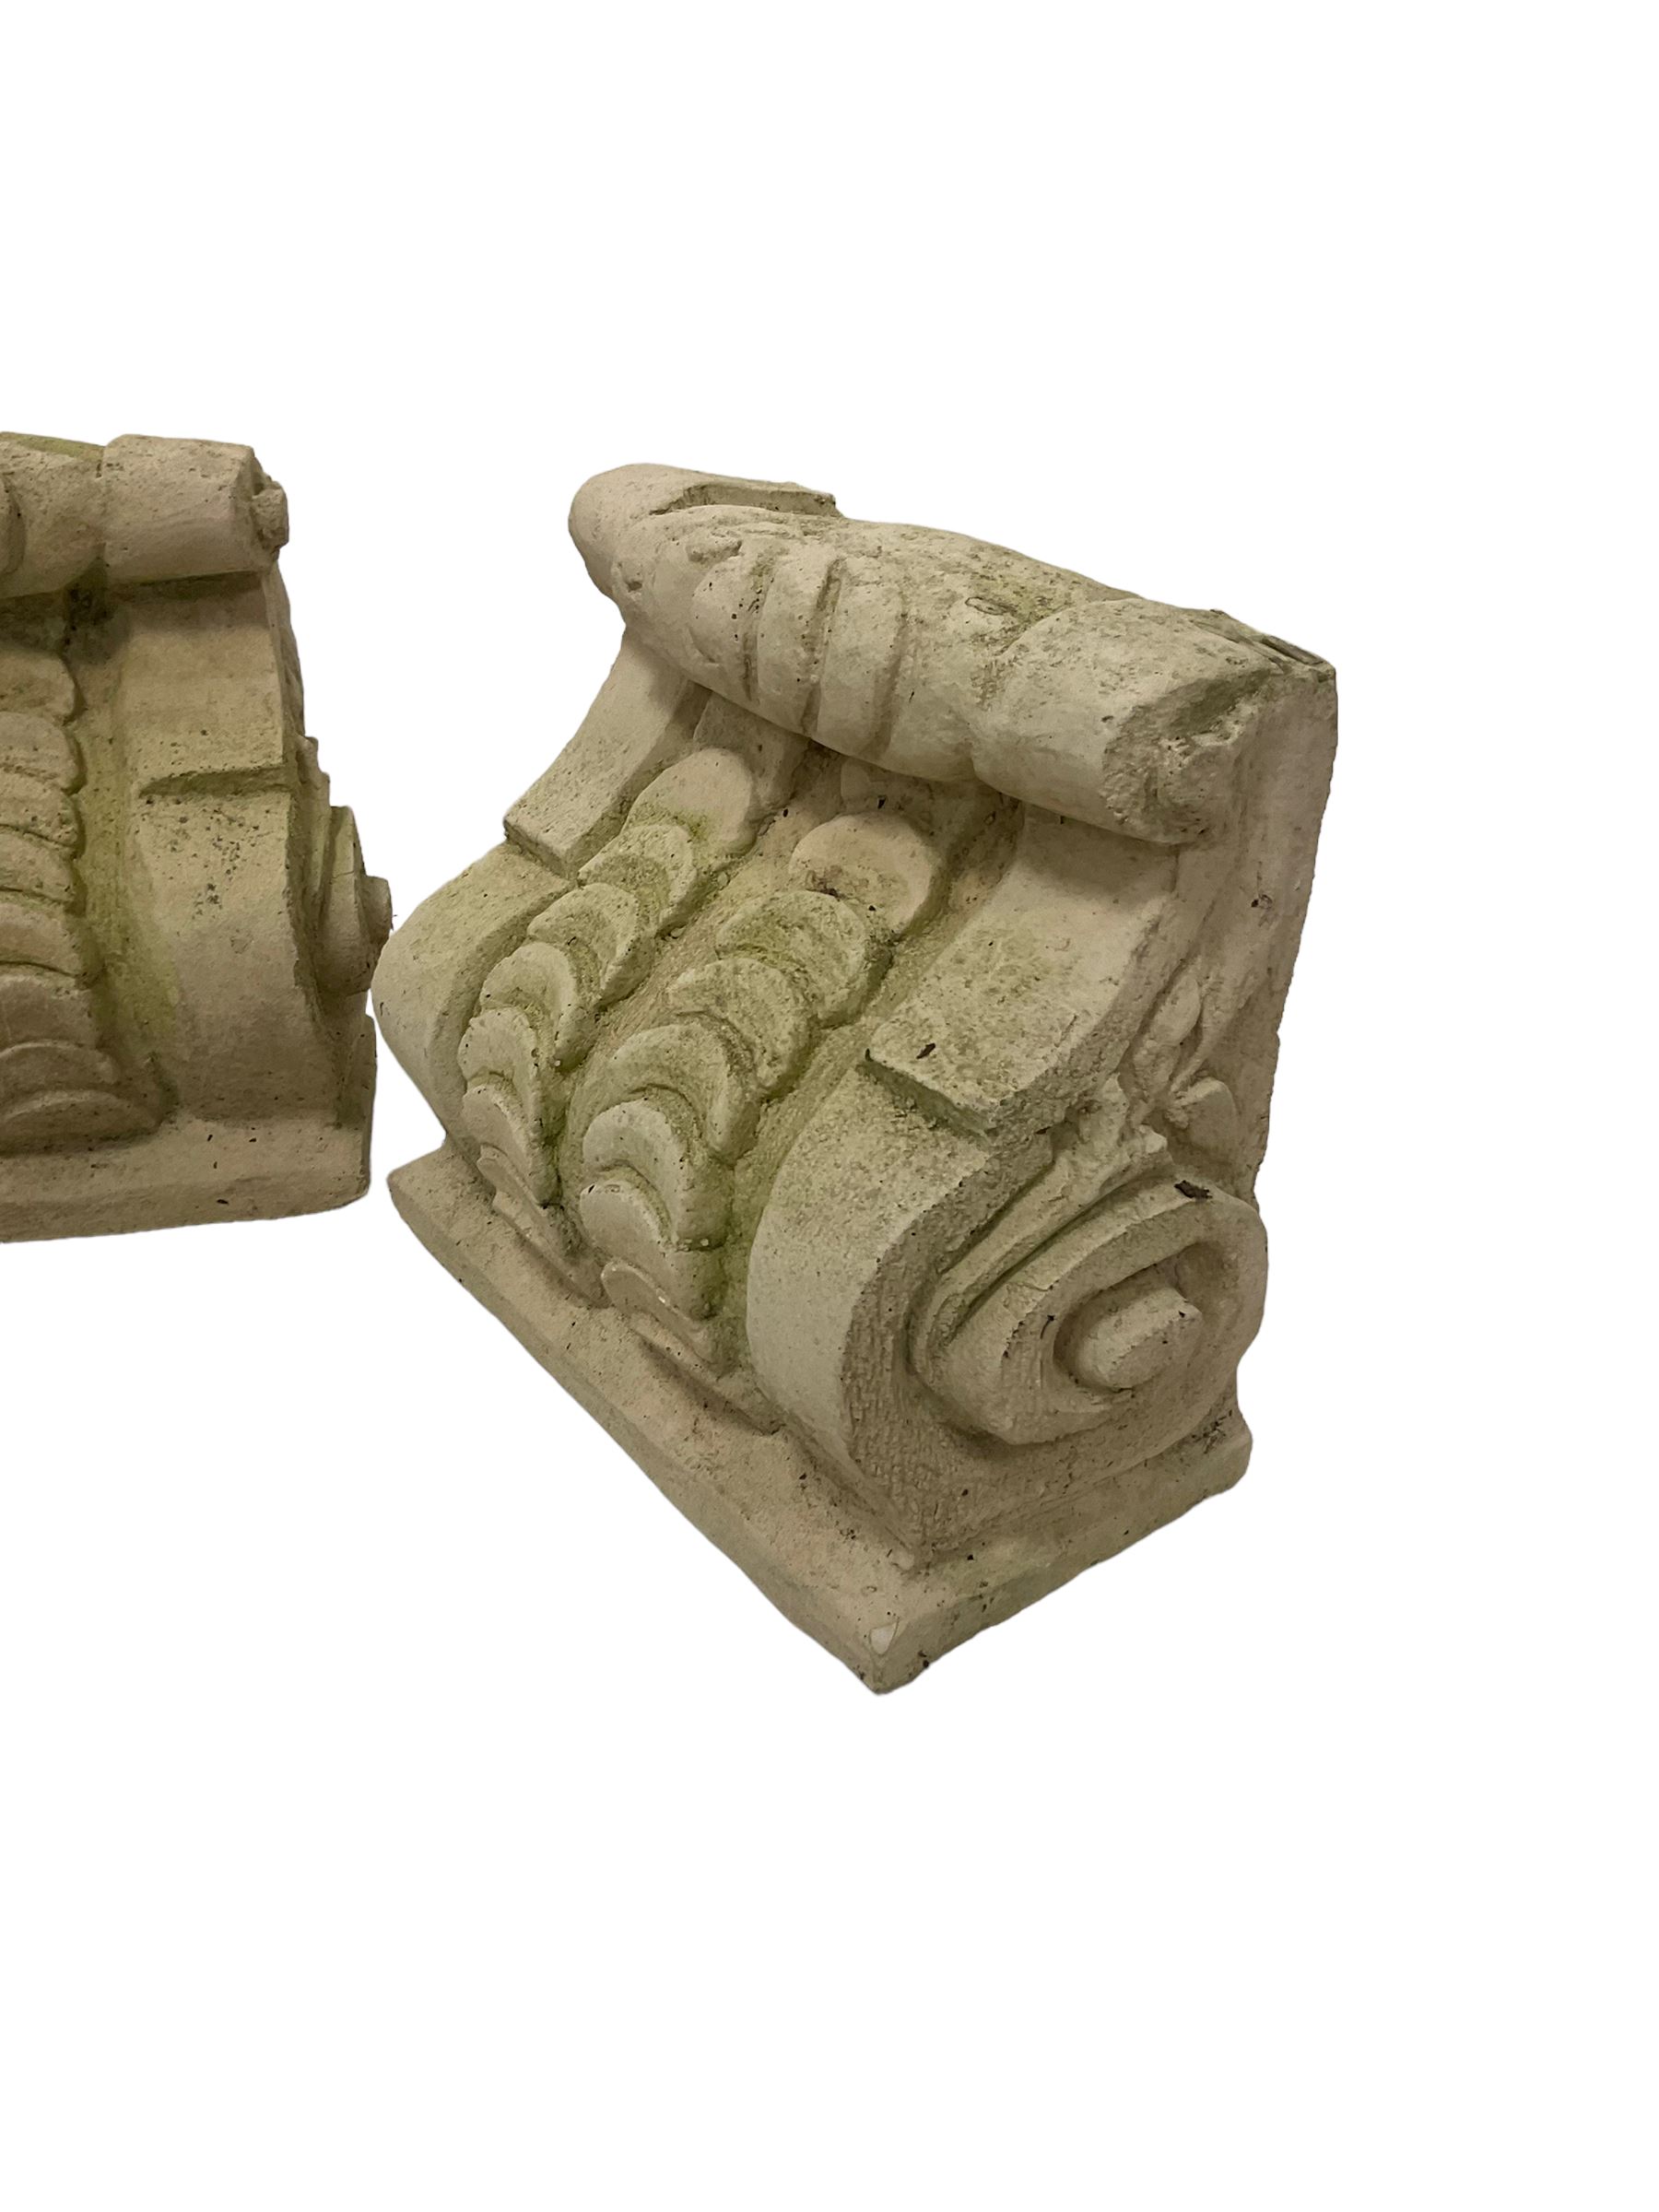 Pair of scrolled cast corbels - Image 2 of 2